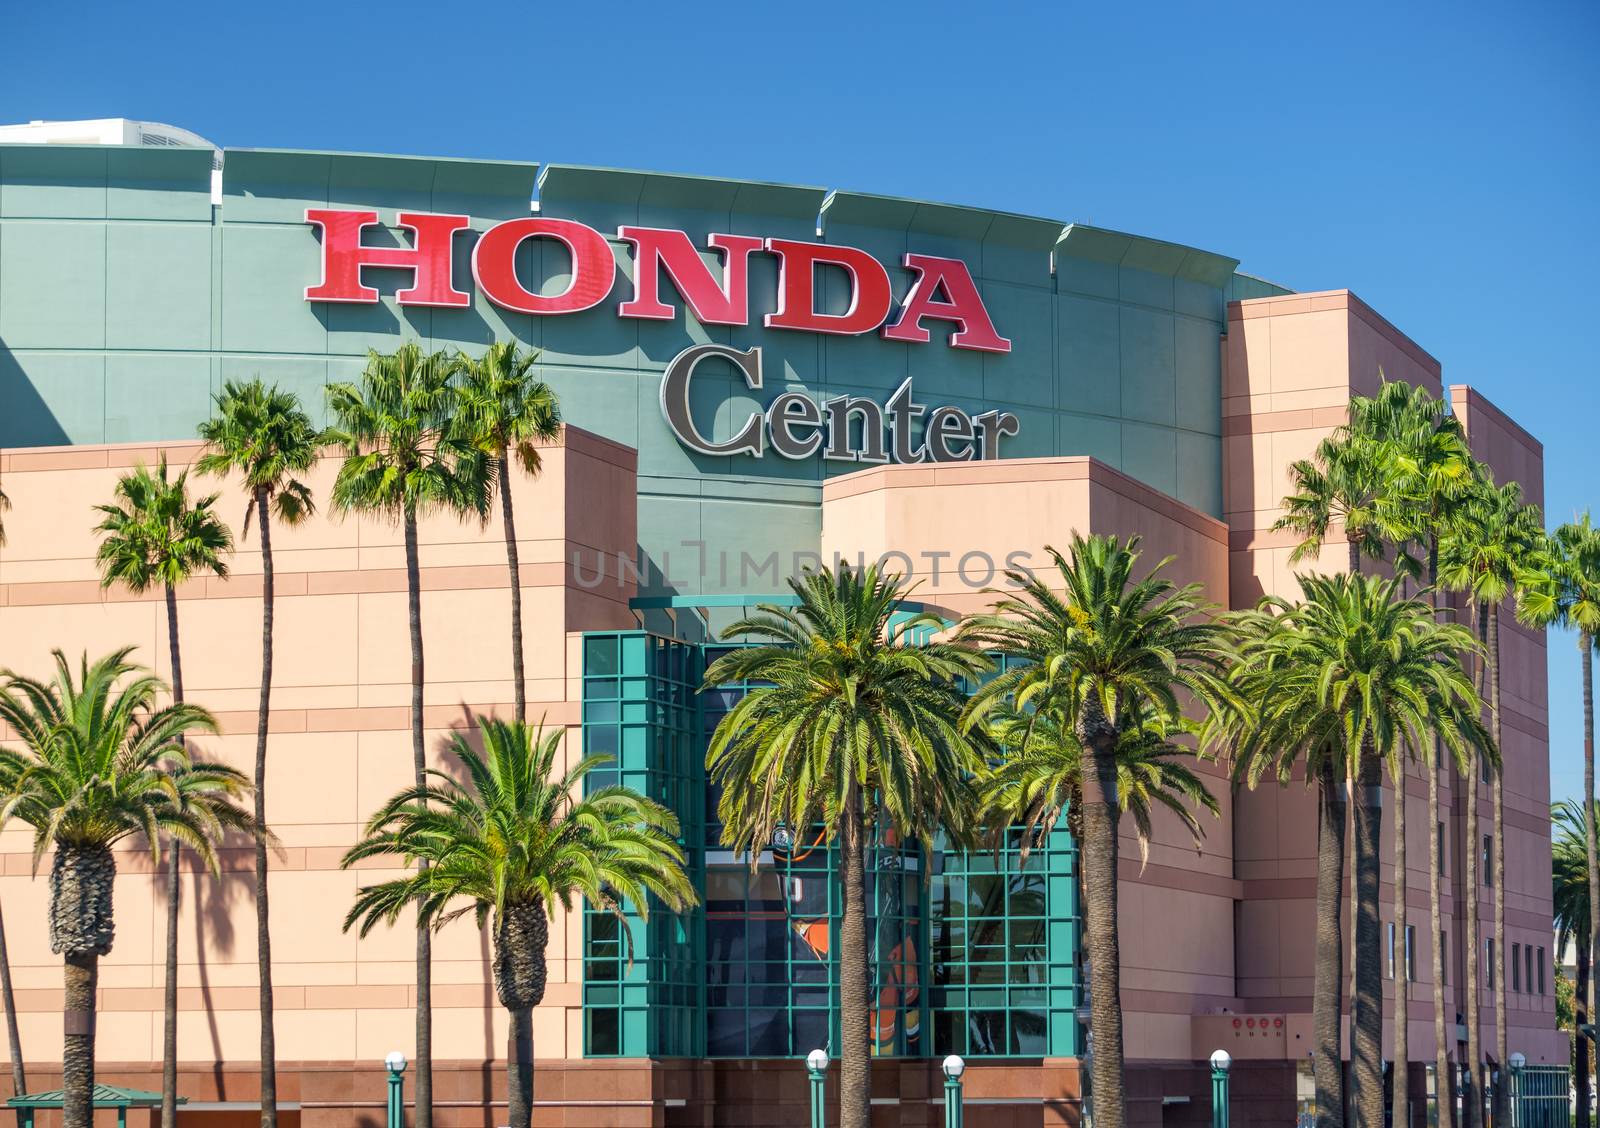 Honda Center Exterior View by wolterk